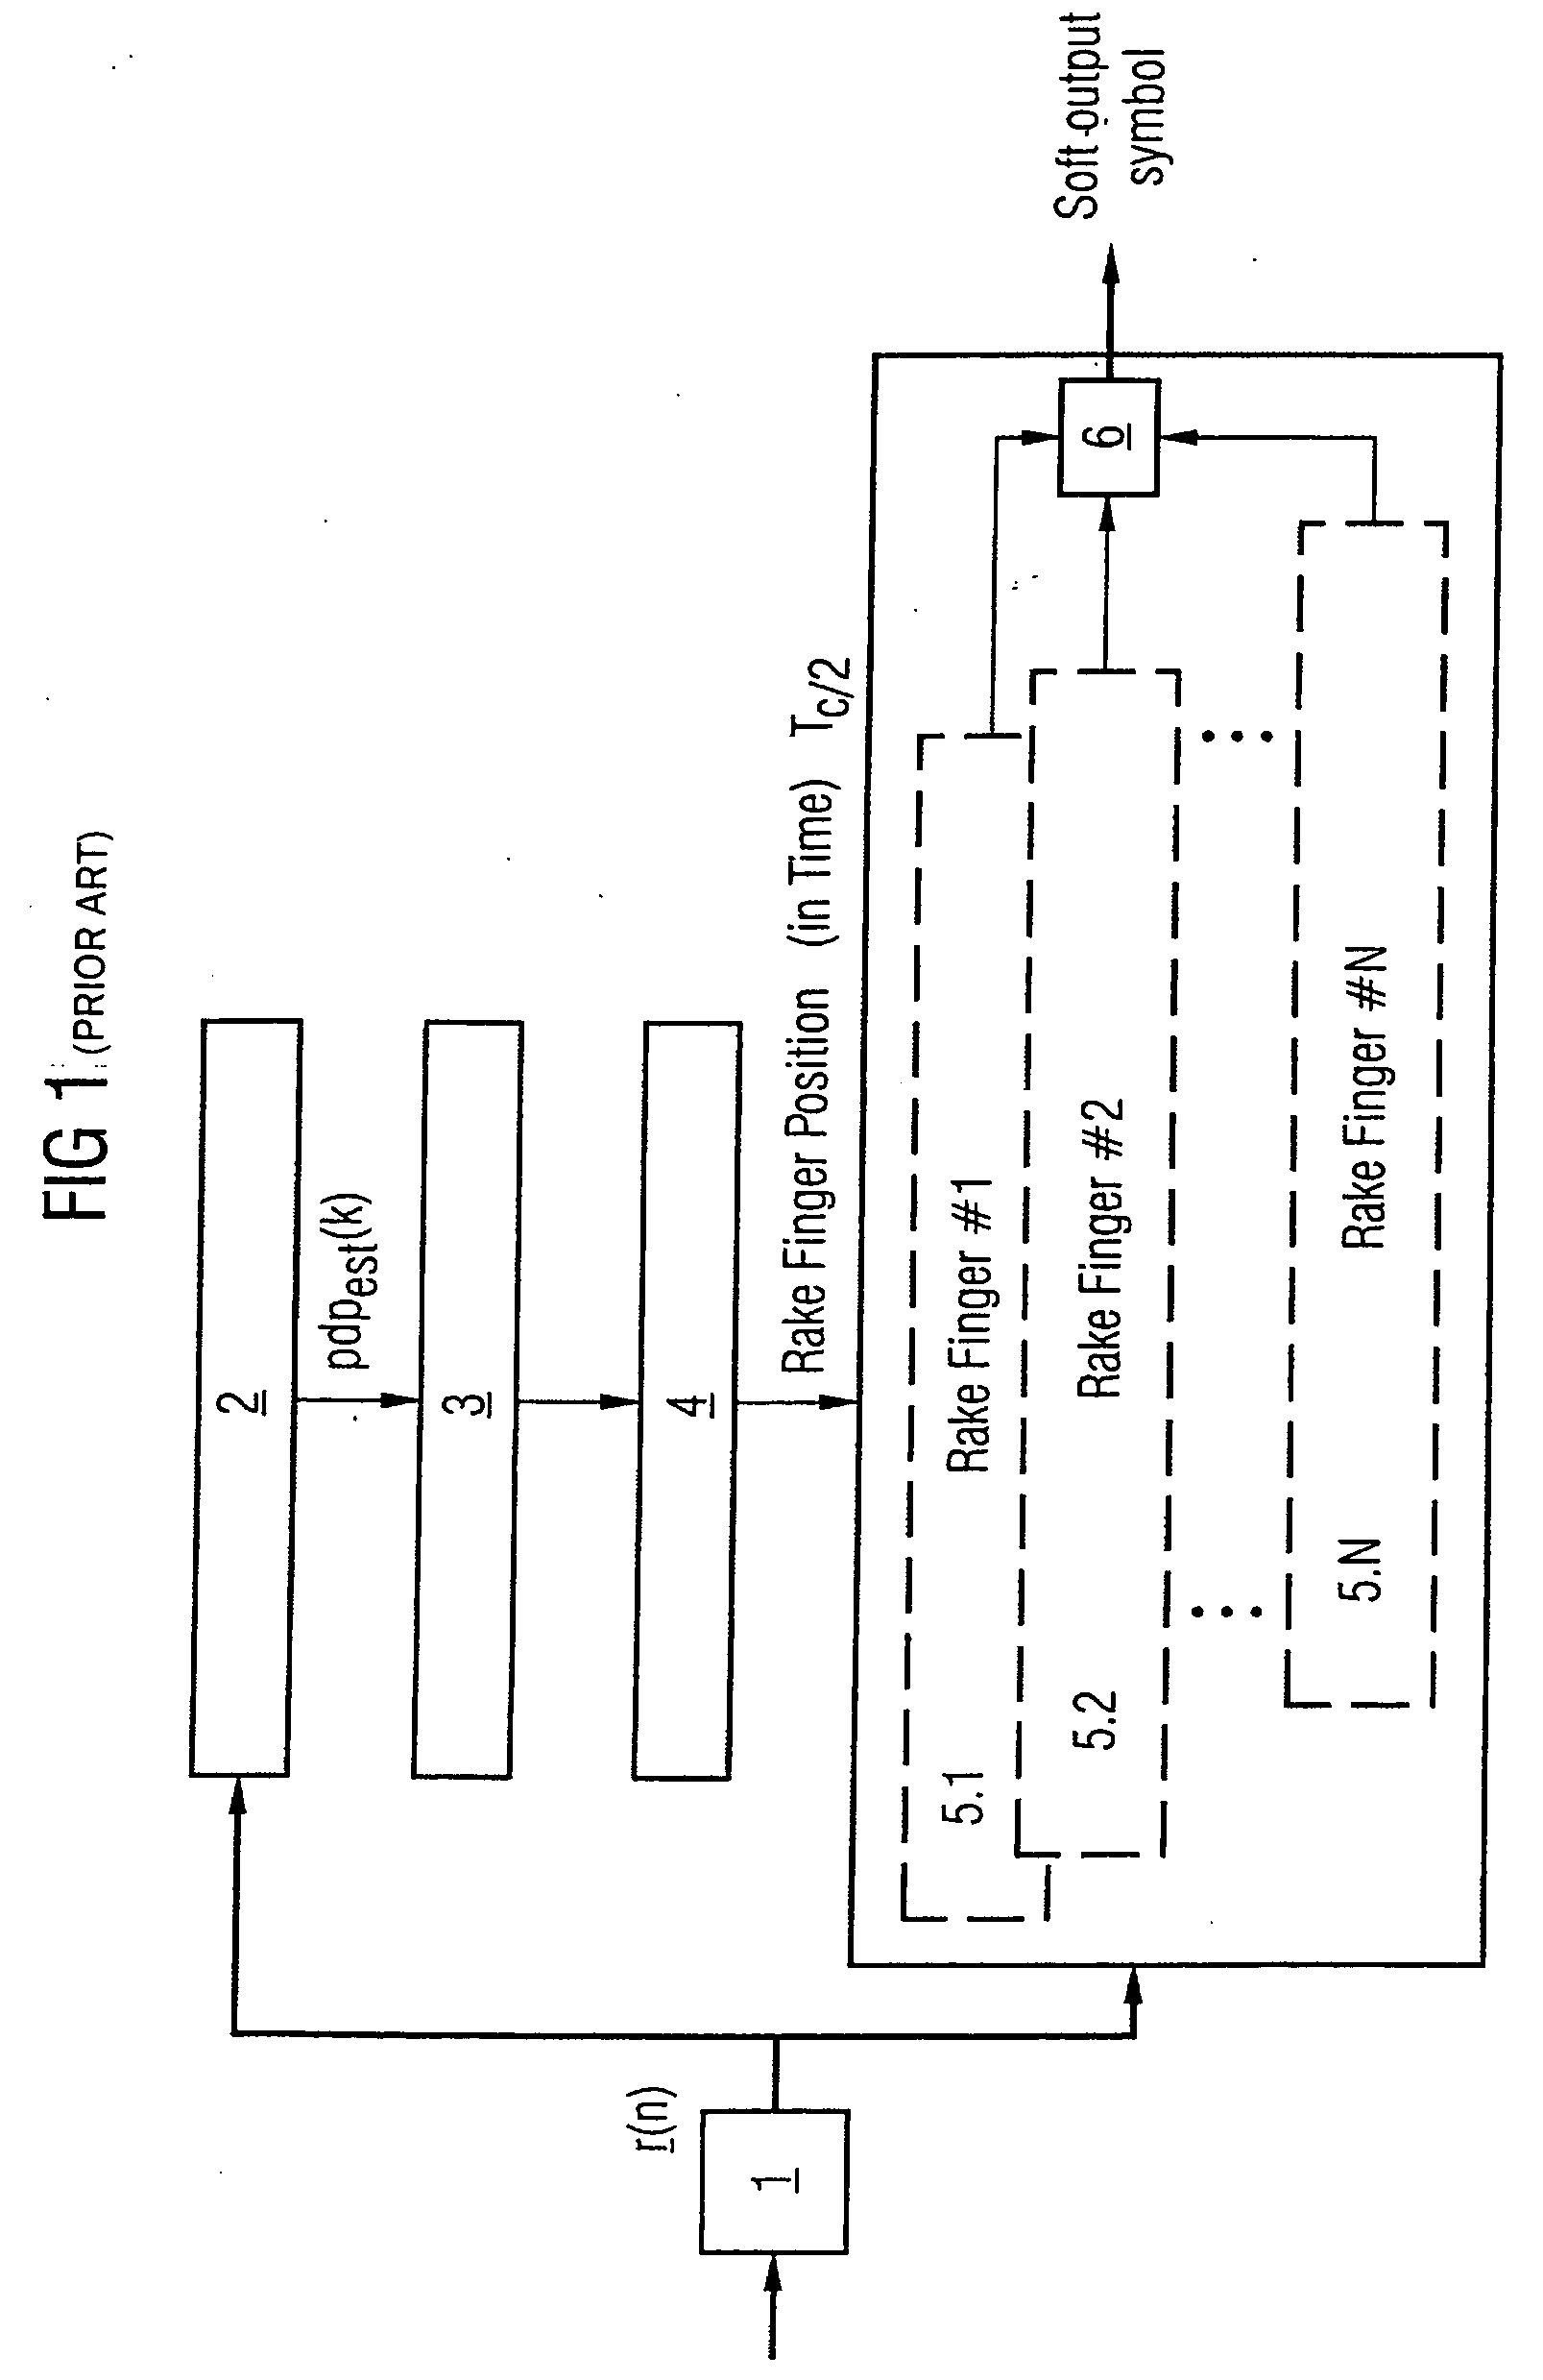 Determination and selection of transmission paths as a function of the operating situation for setting up rake fingers for rake receiver units in mobile communication terminals